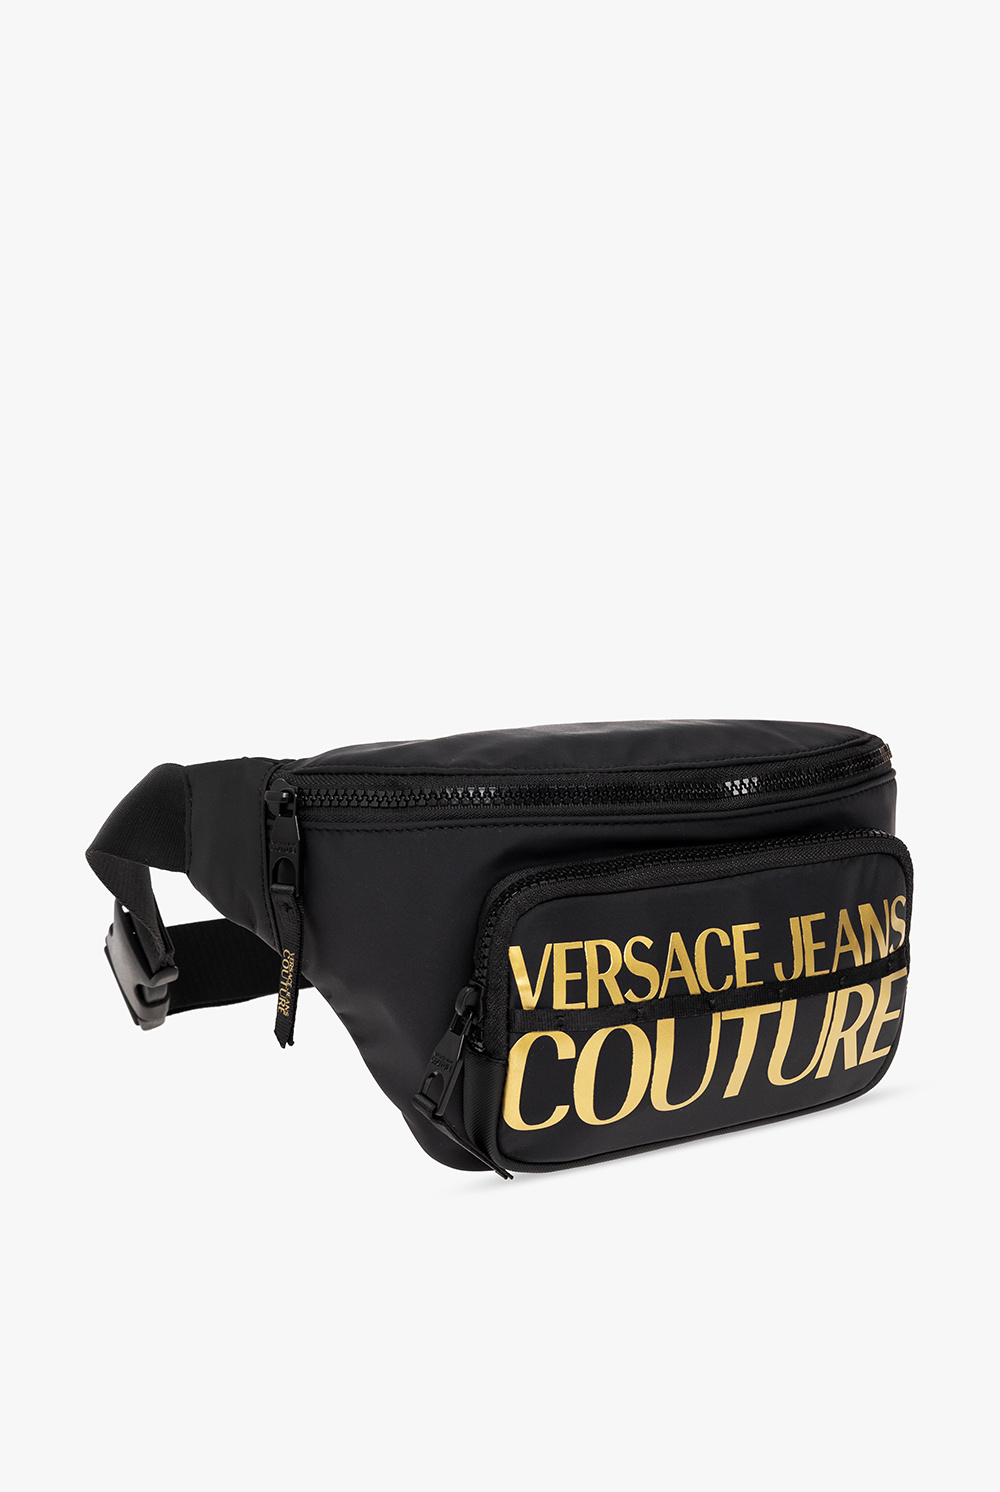 Versace Jeans Couture ARMEDANGELS Jeans 'Maira' grigio scuro